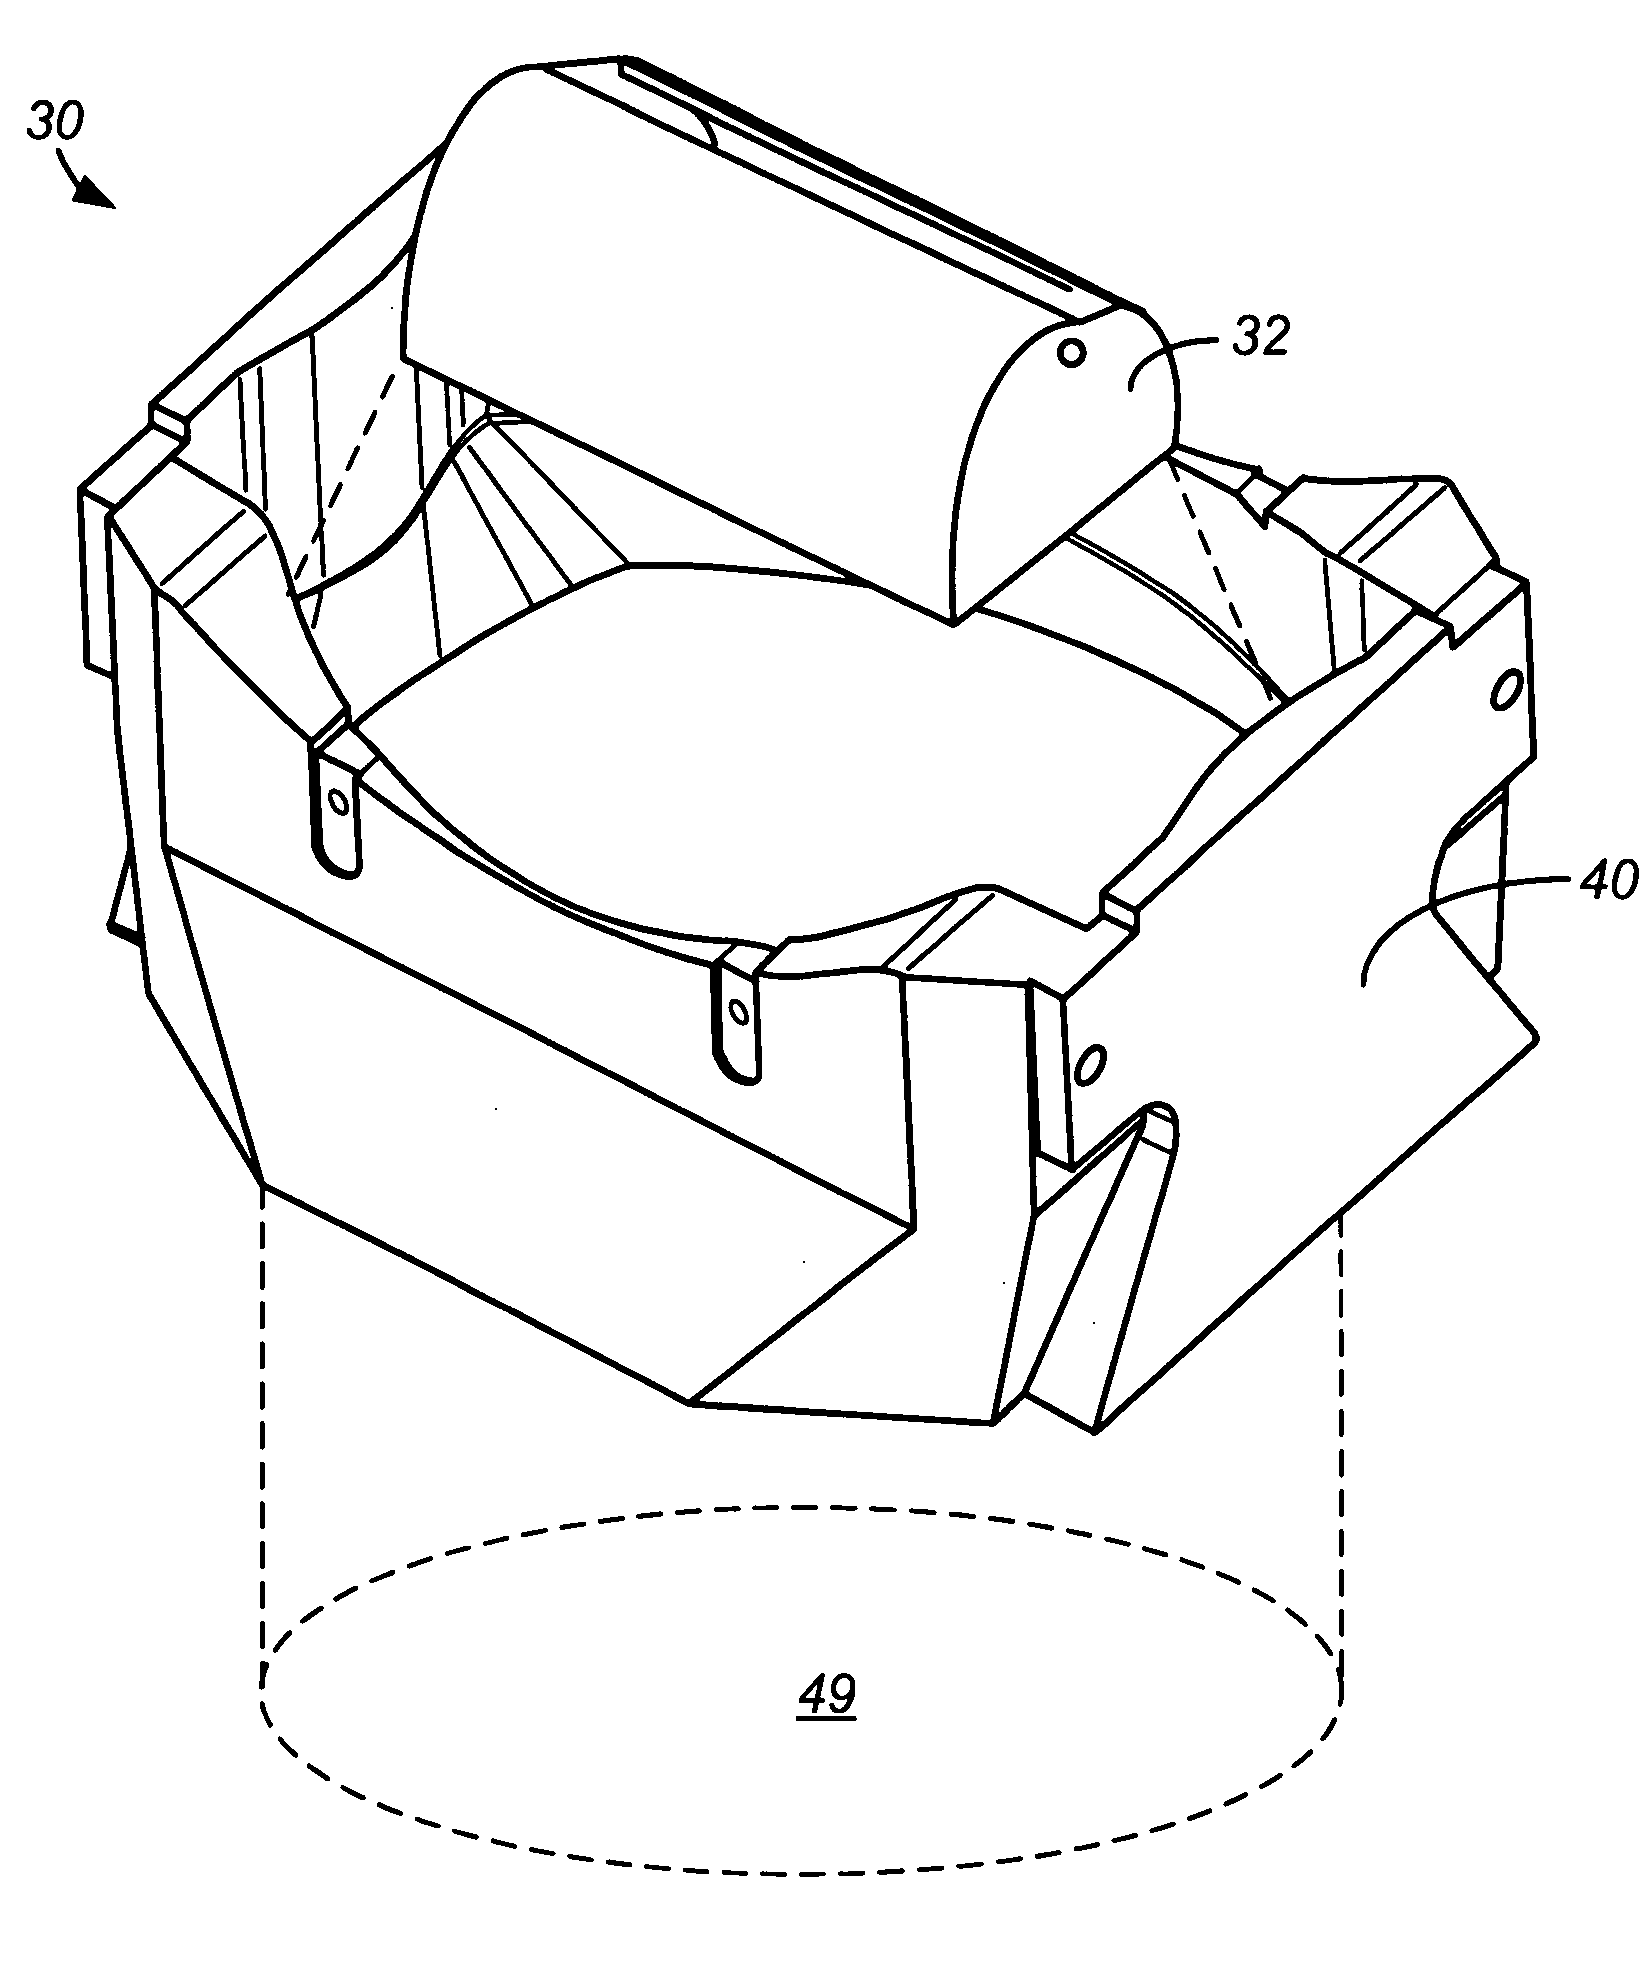 Apparatus and method for treating a substrate with UV radiation using primary and secondary reflectors